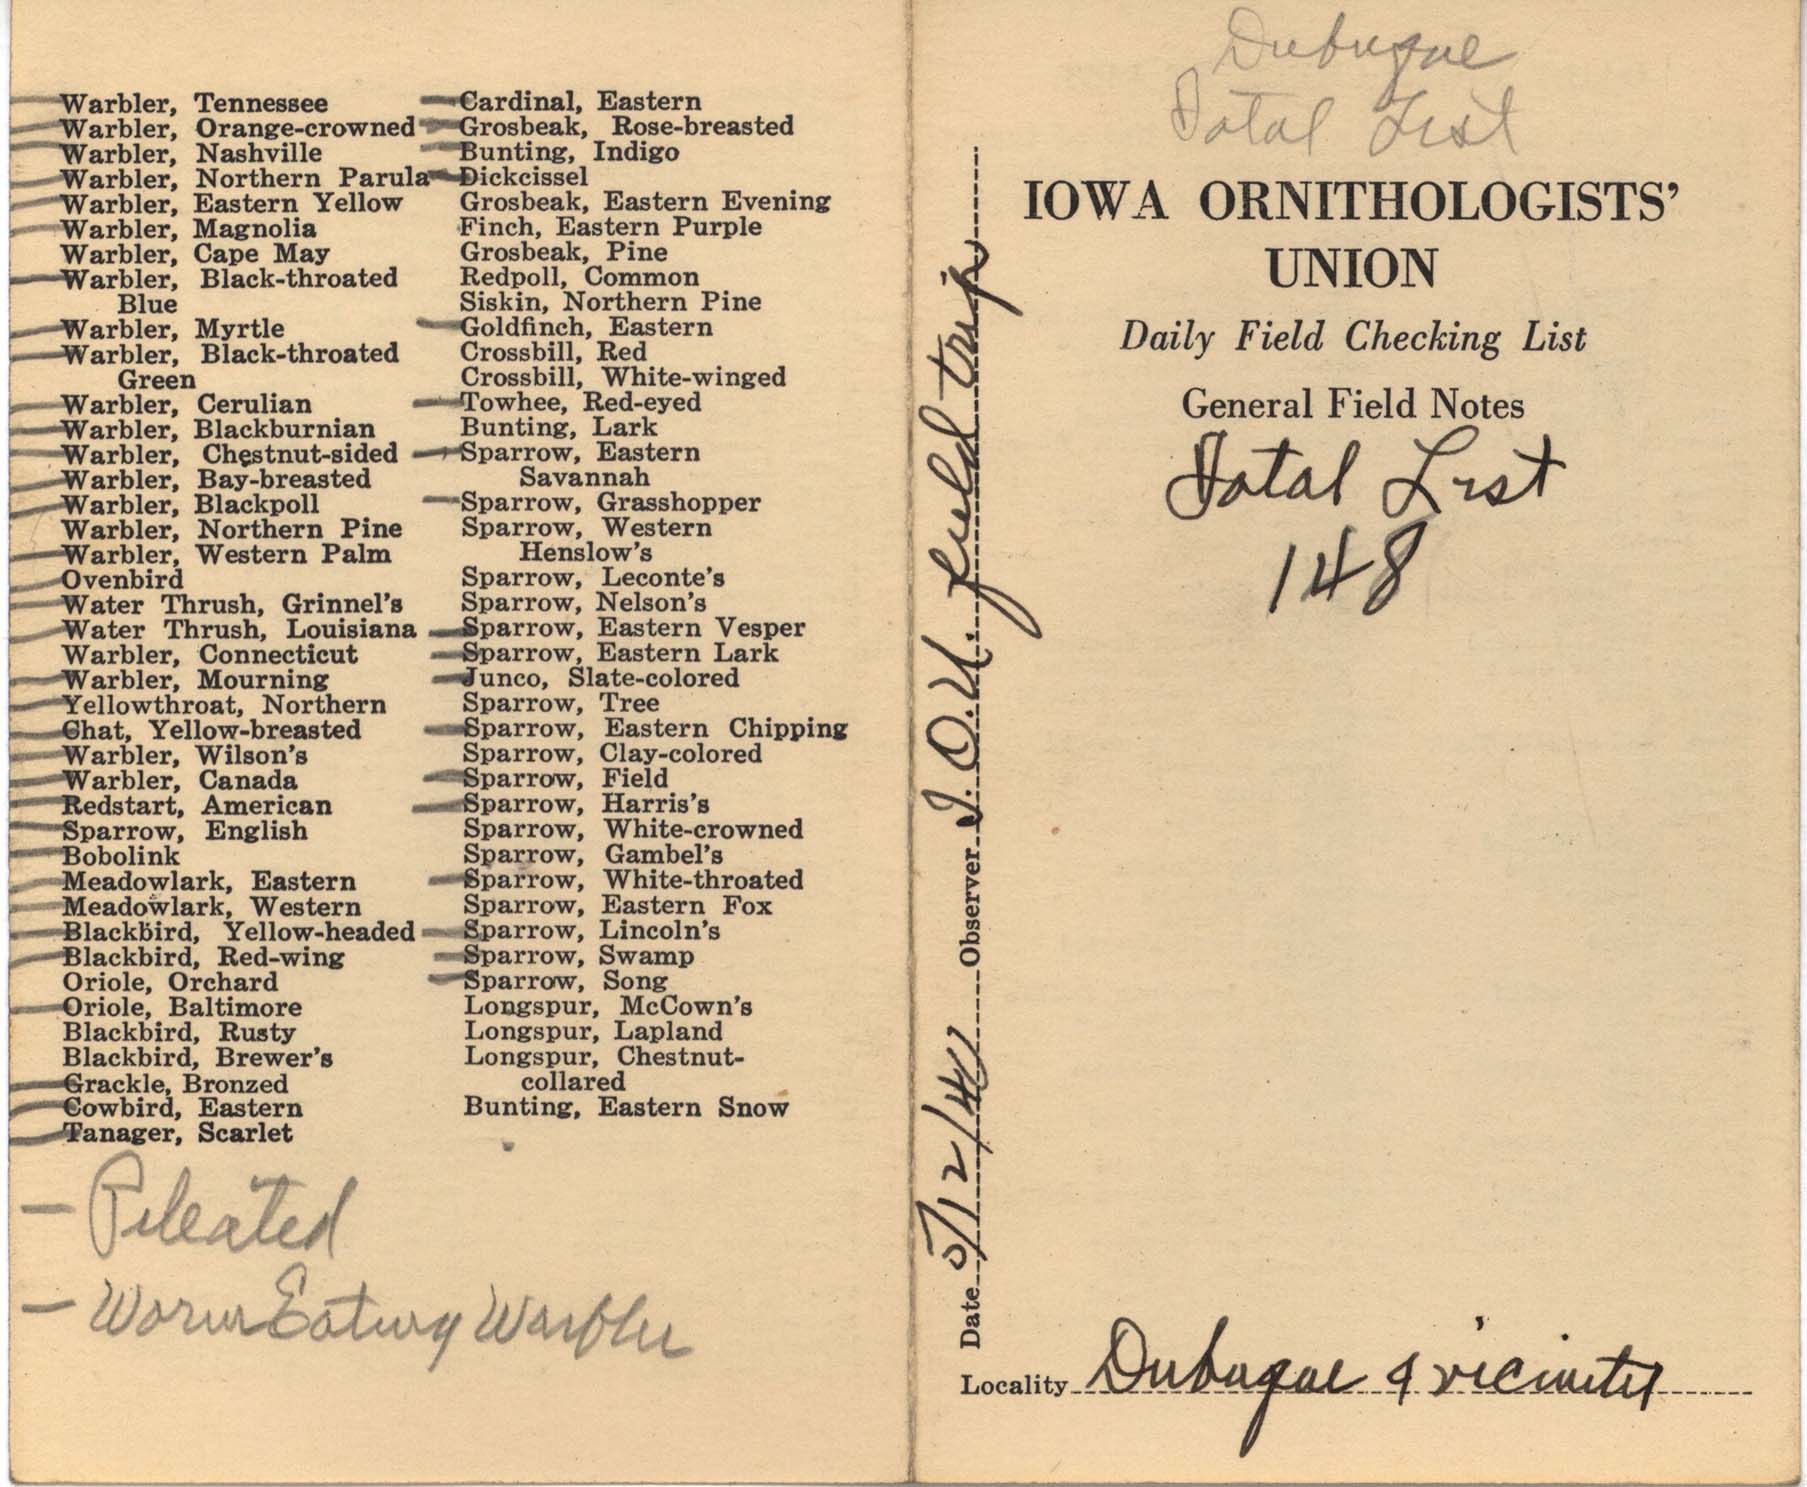 Daily field checking list by Walter Rosene, May 12, 1940